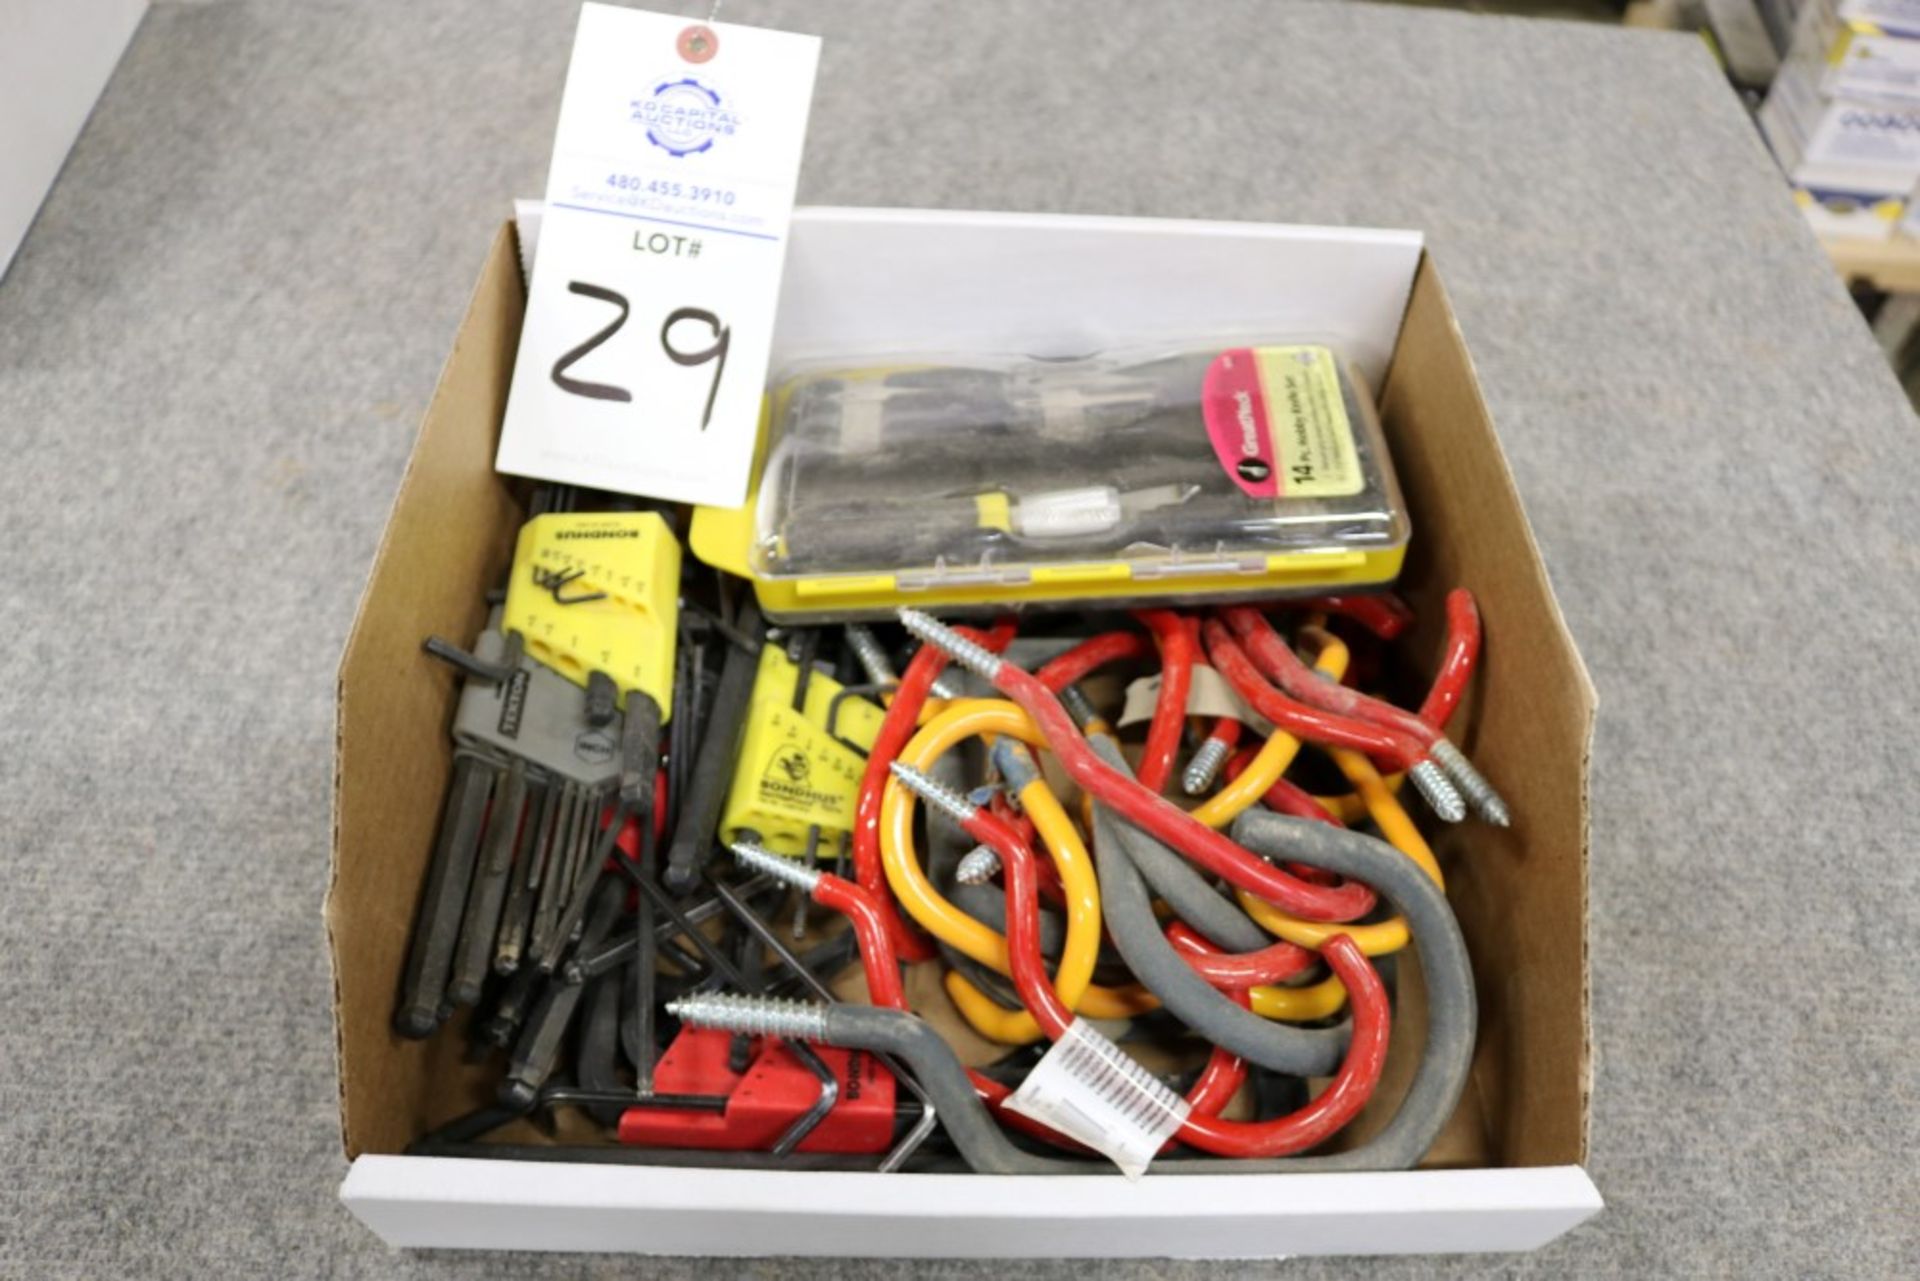 Box of Allen Keys, Shop Hooks, Crescent Wrench and Exacto Knife Kit - Image 6 of 6